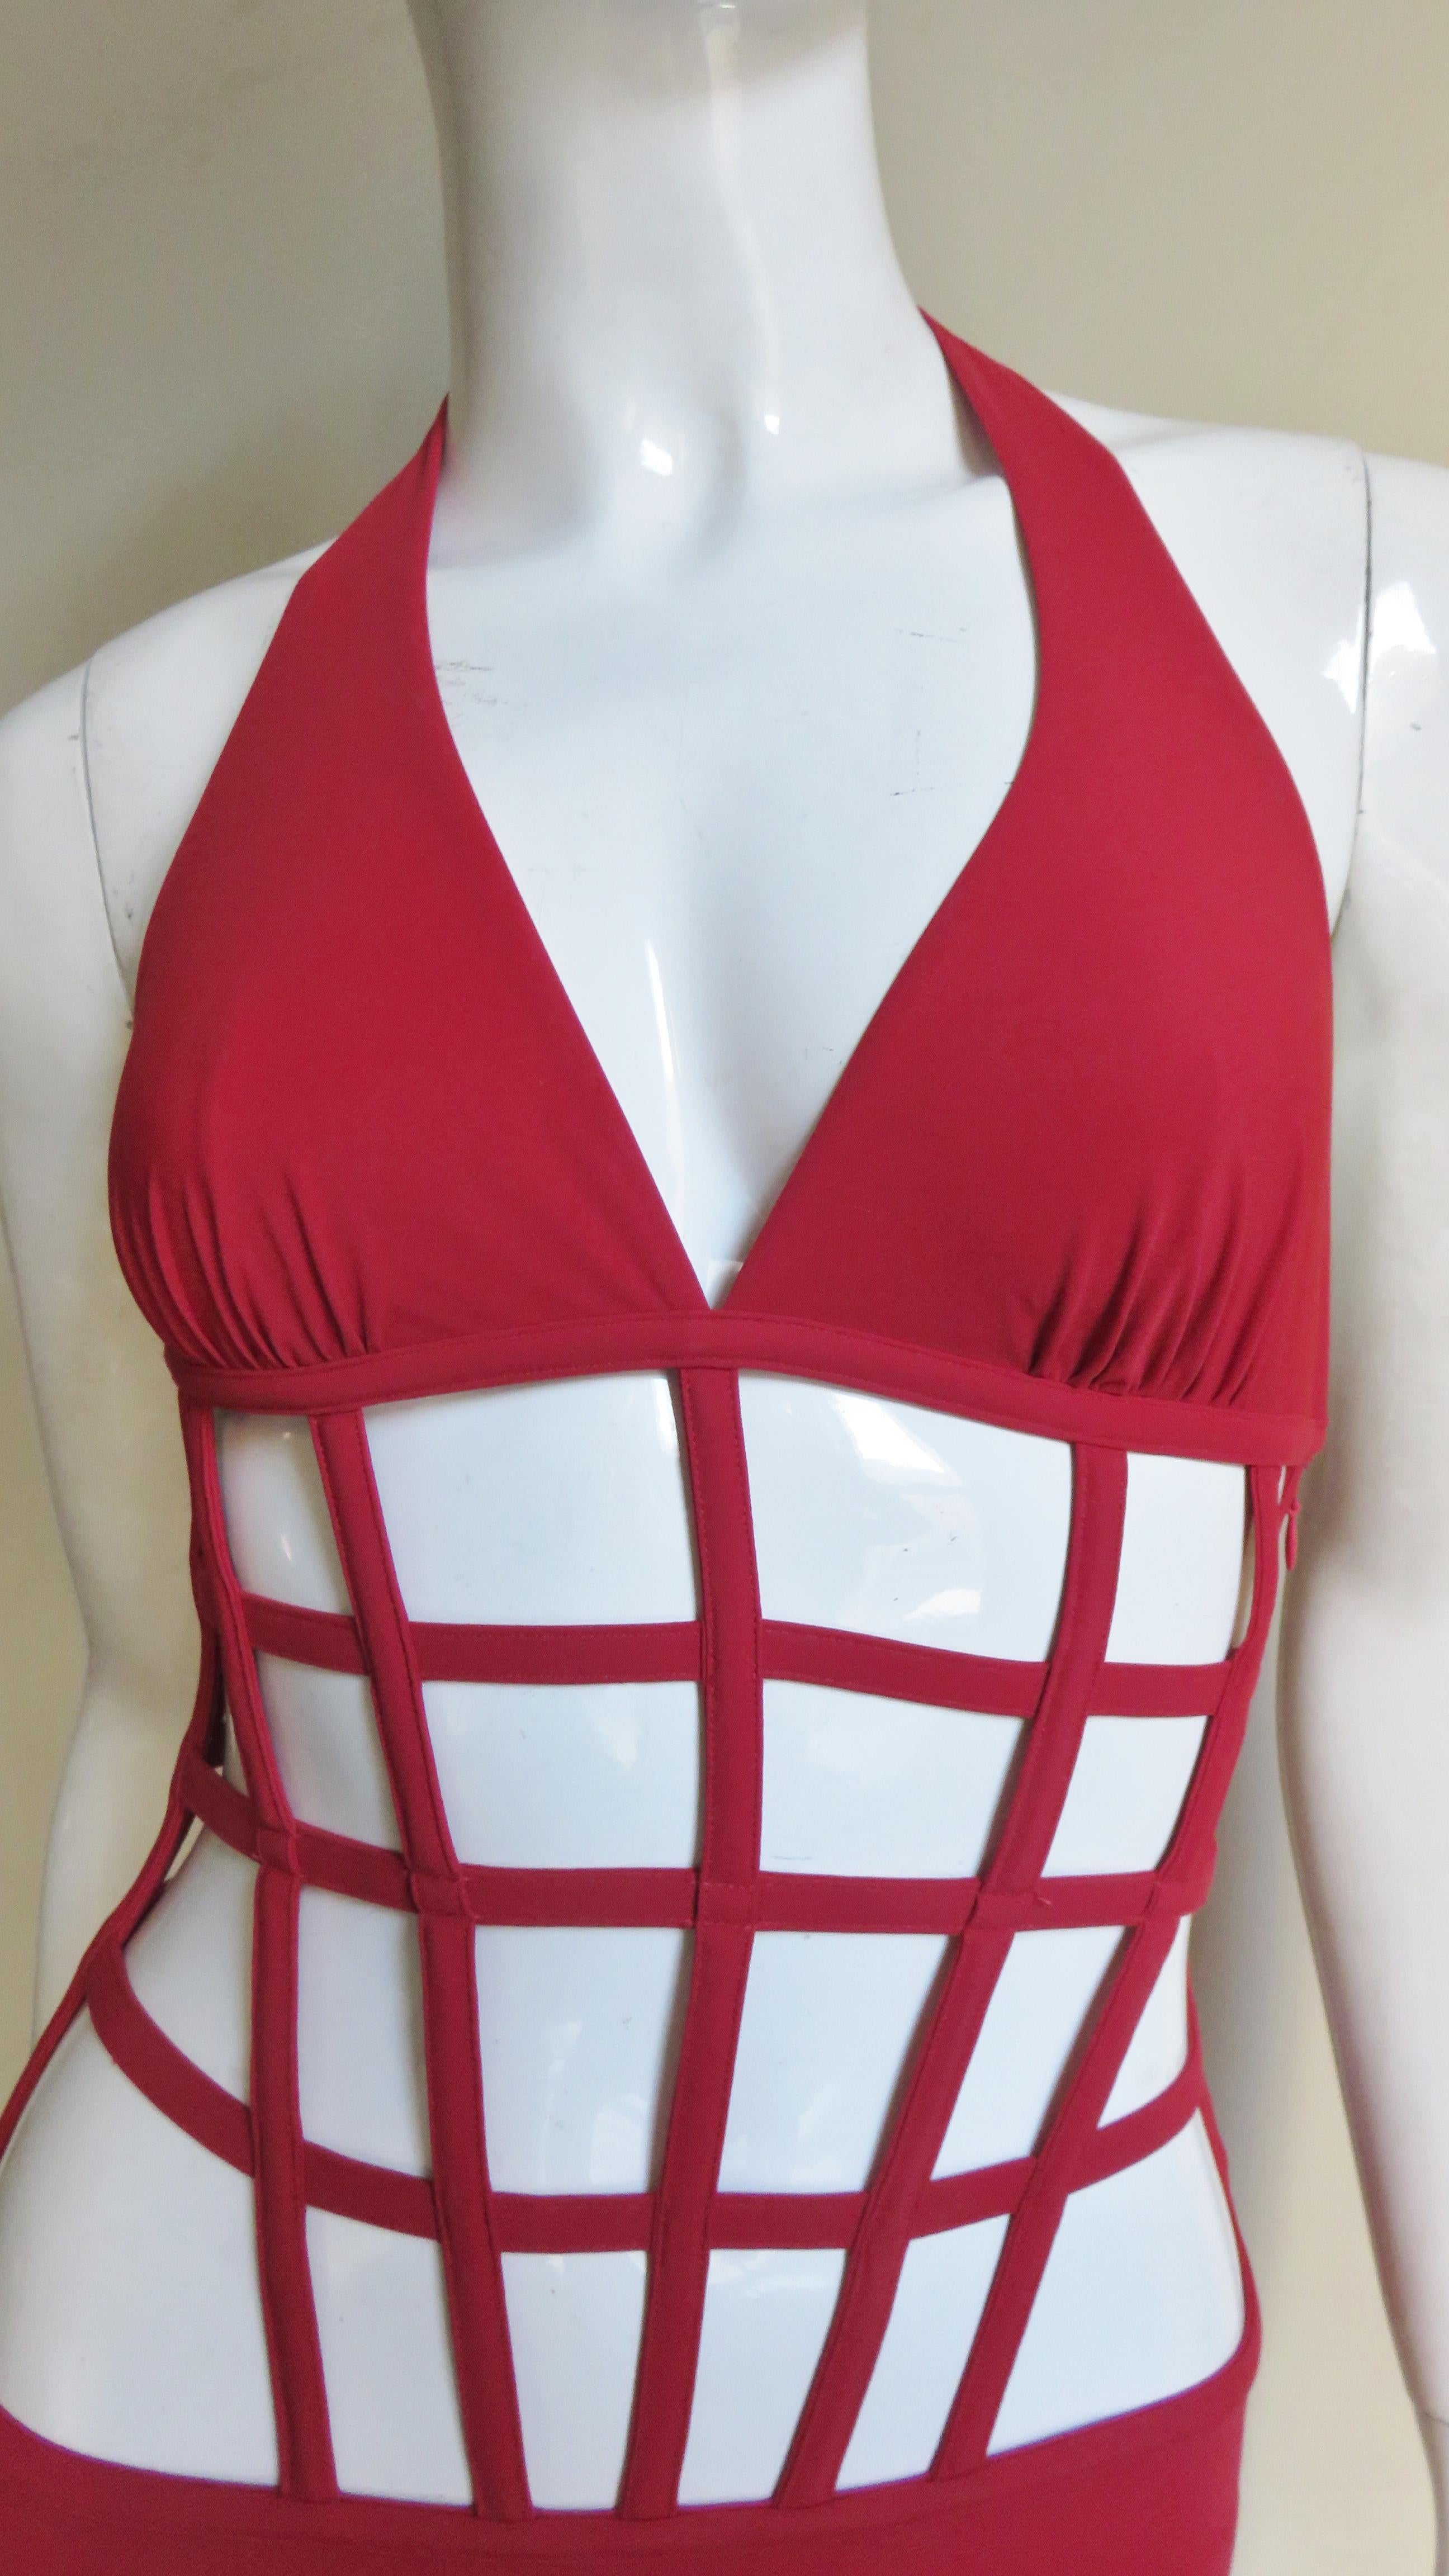 A fabulous red swimsuit from Jean Paul Gaultier for La Perla.  It has a halter style top and a bikini bottom joined with boned horizontal and vertical strips creating a geometric effect.  There is a side invisible zipper and ties at the back of the